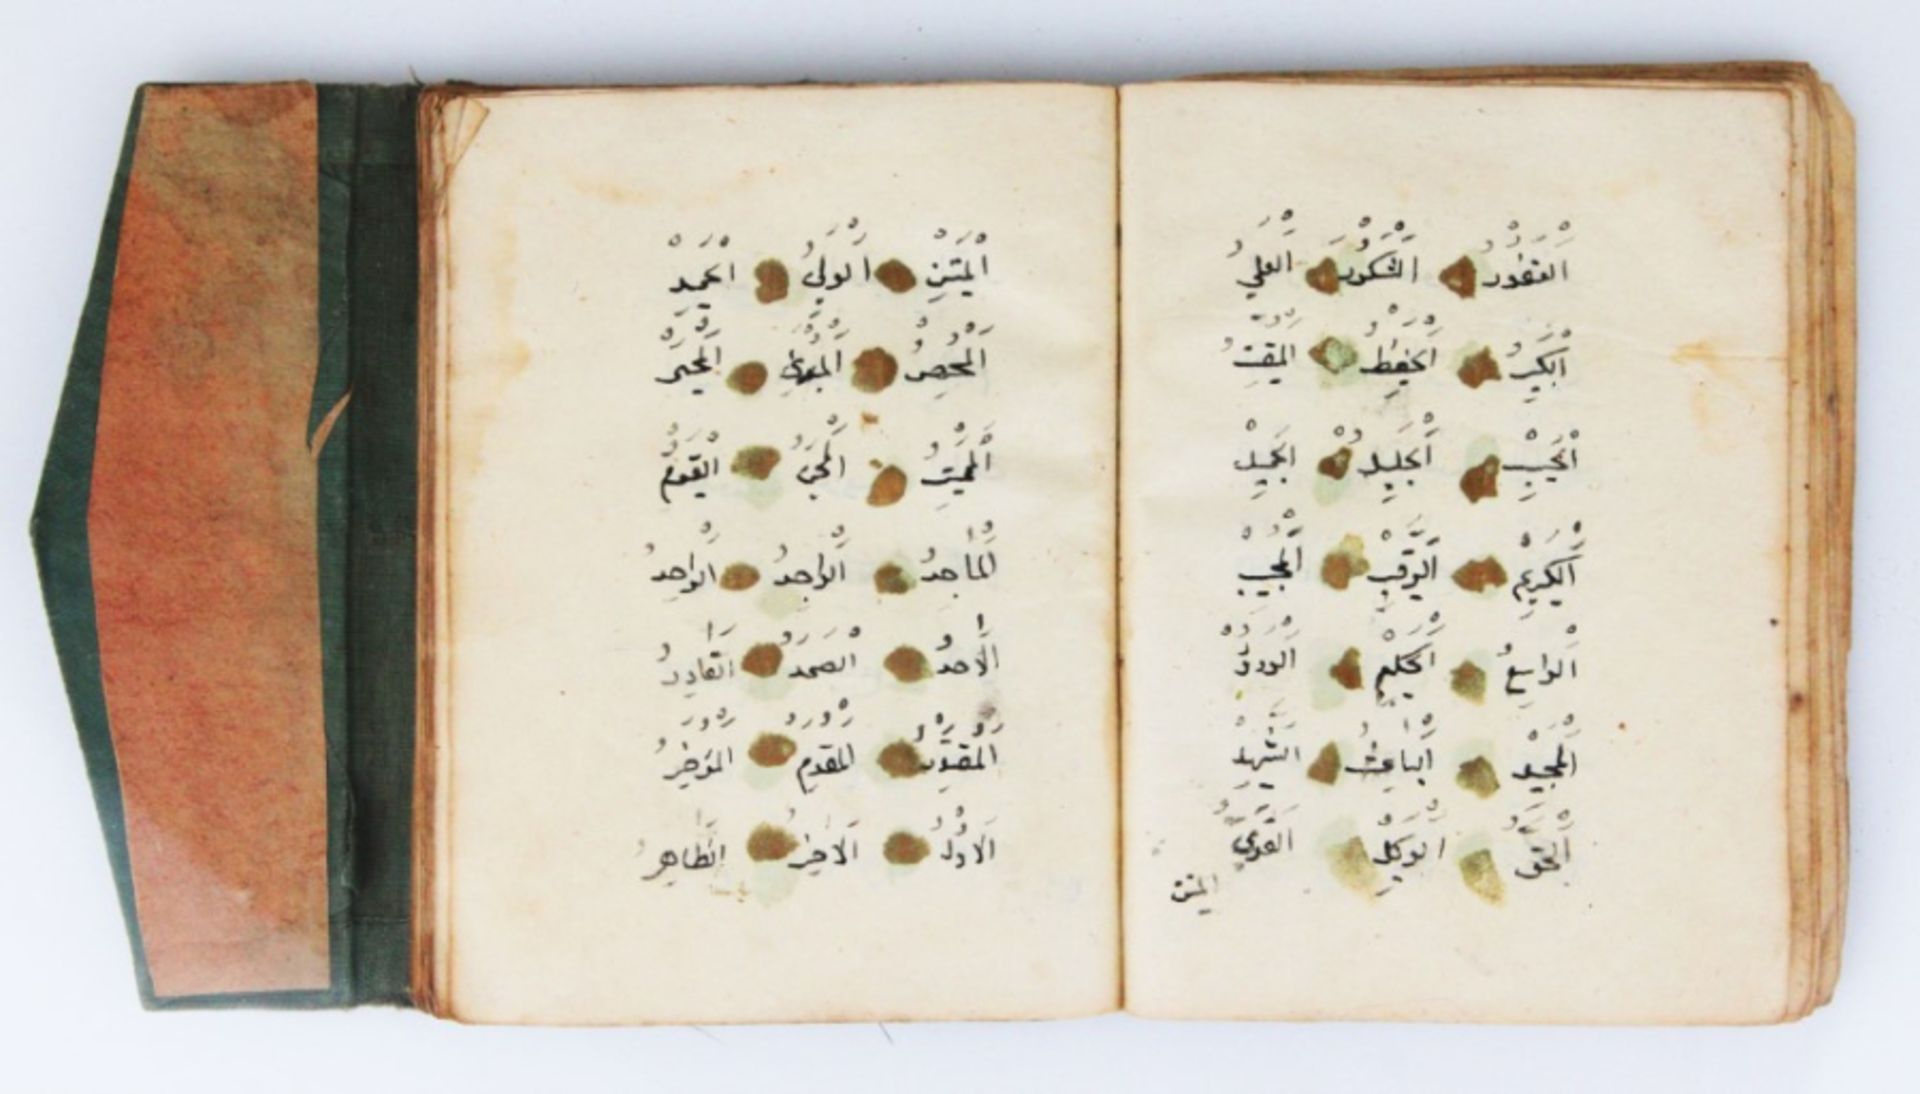 A 18th century Ottoman book with suras and prayers - Image 4 of 12